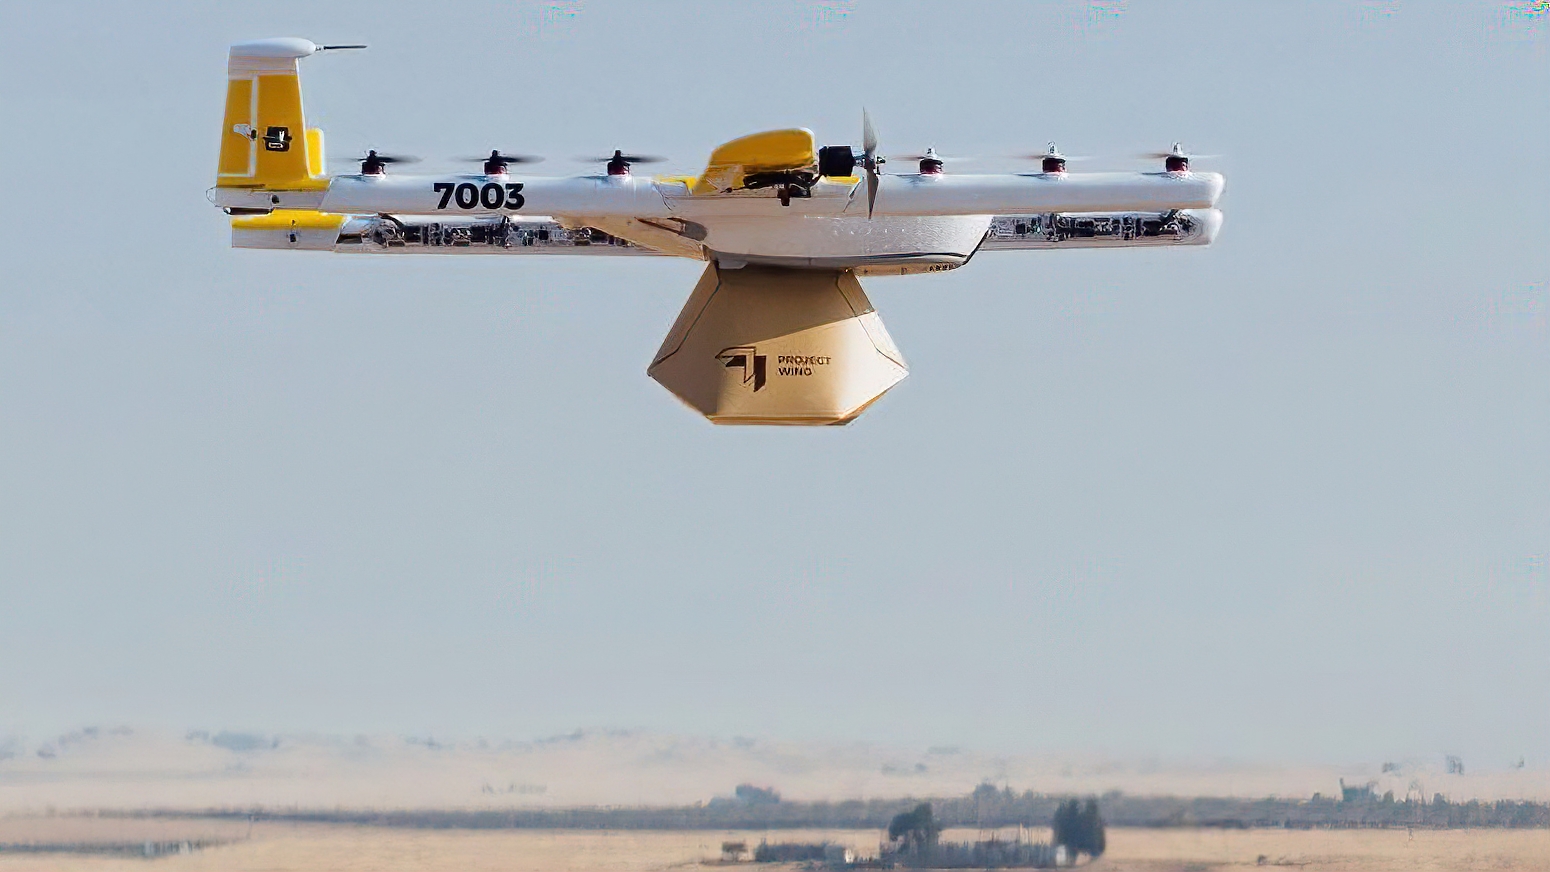 FAA to award first drone delivery service license next month